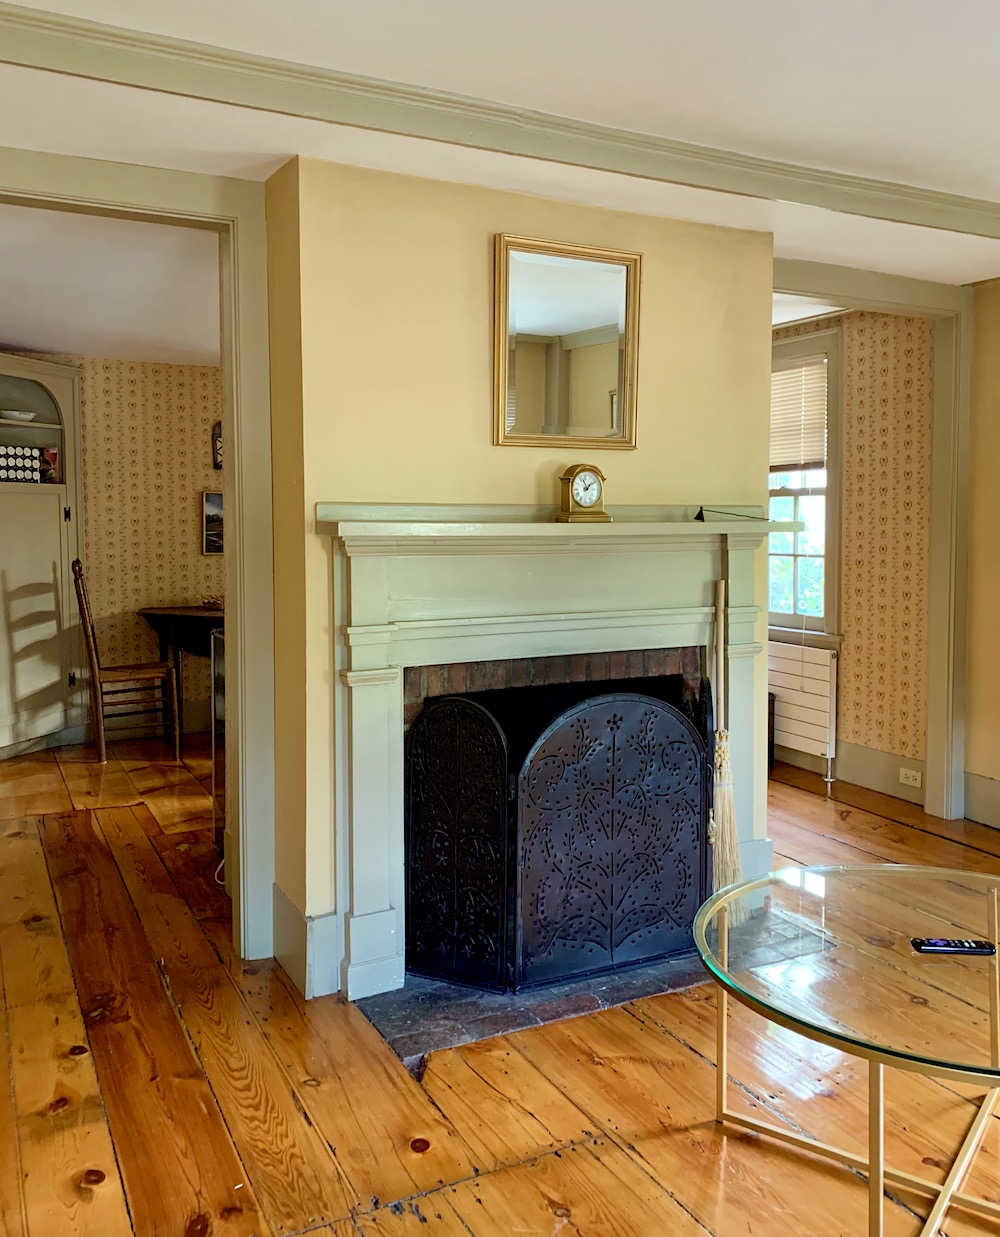 18th century mouldings and doors - 153 Elm St airbnb - fireplace wall runtel baseboard heat and radiators